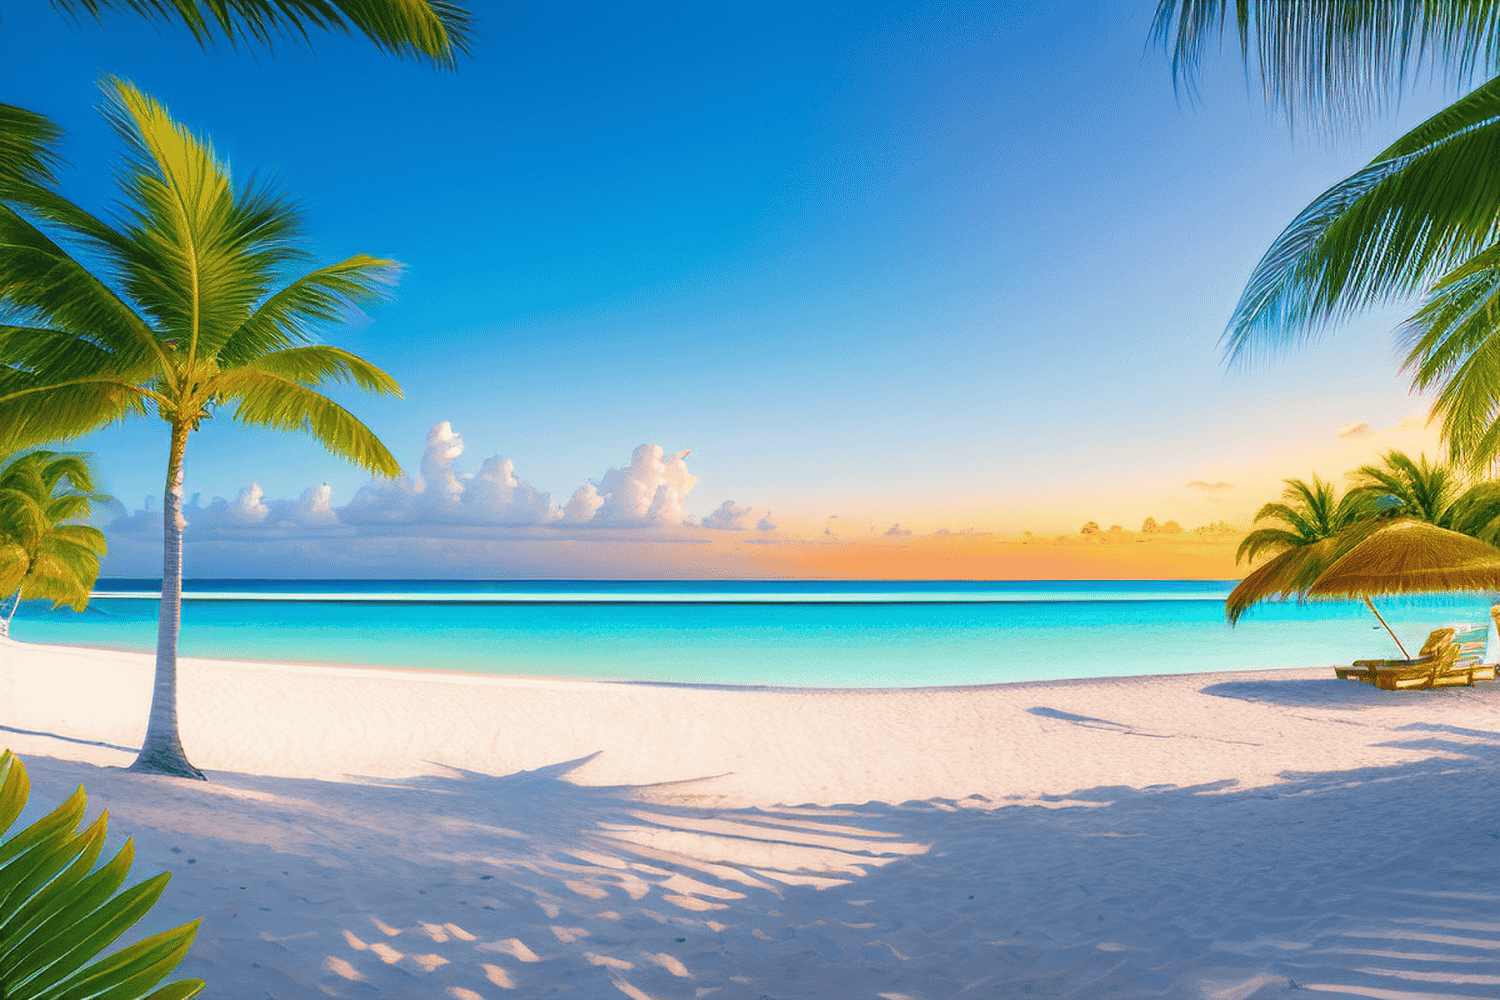 Information about Cayman Islands